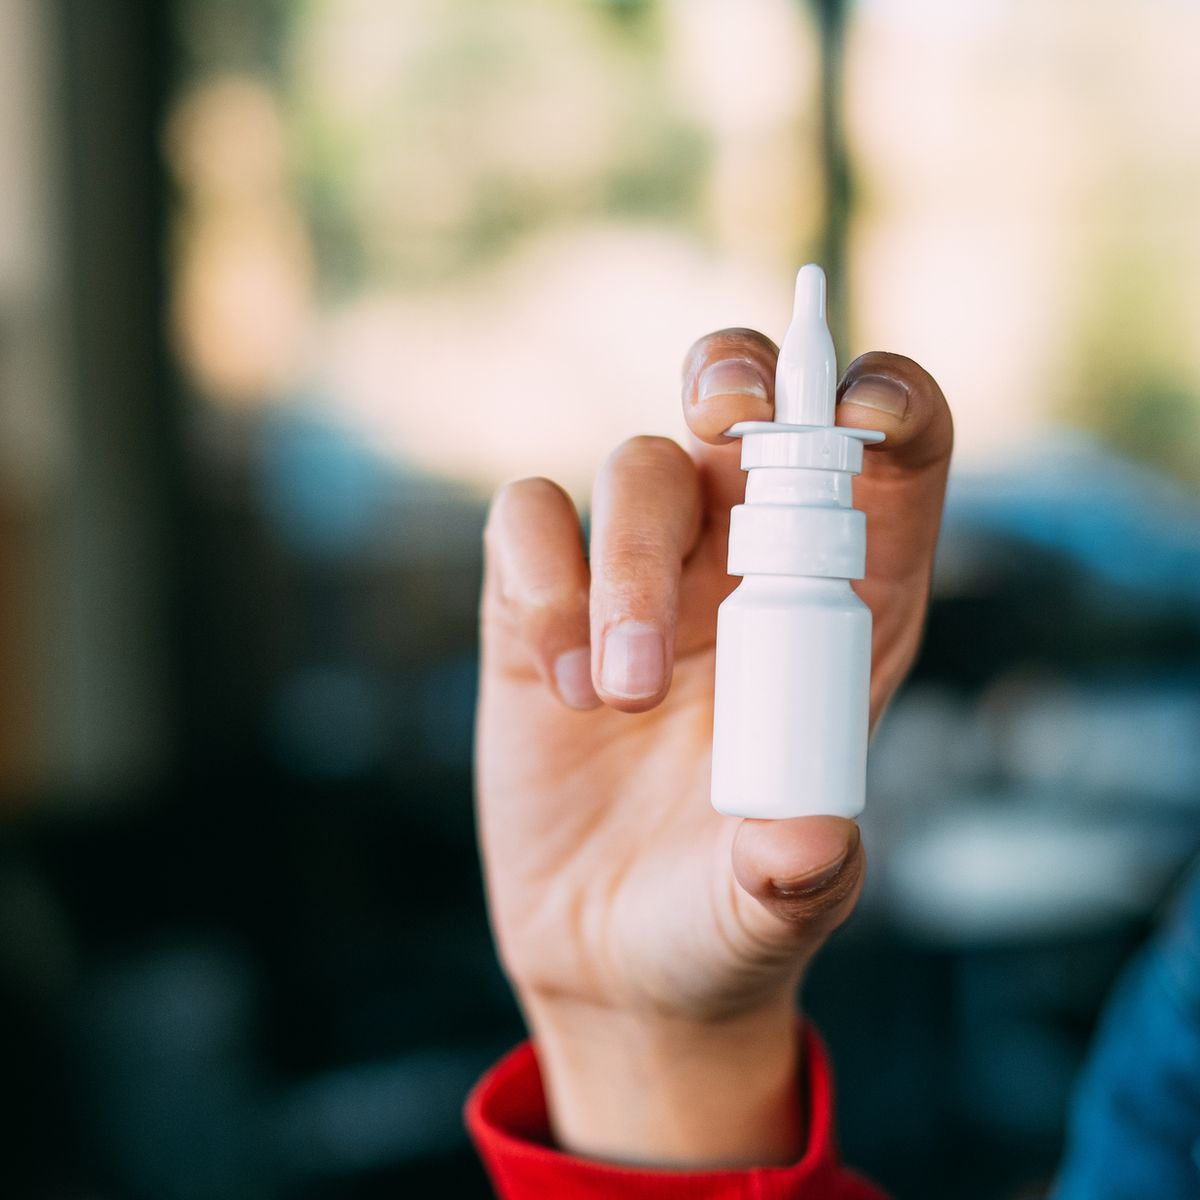 Always sticking these into your nose? Why nasal inhalers can be